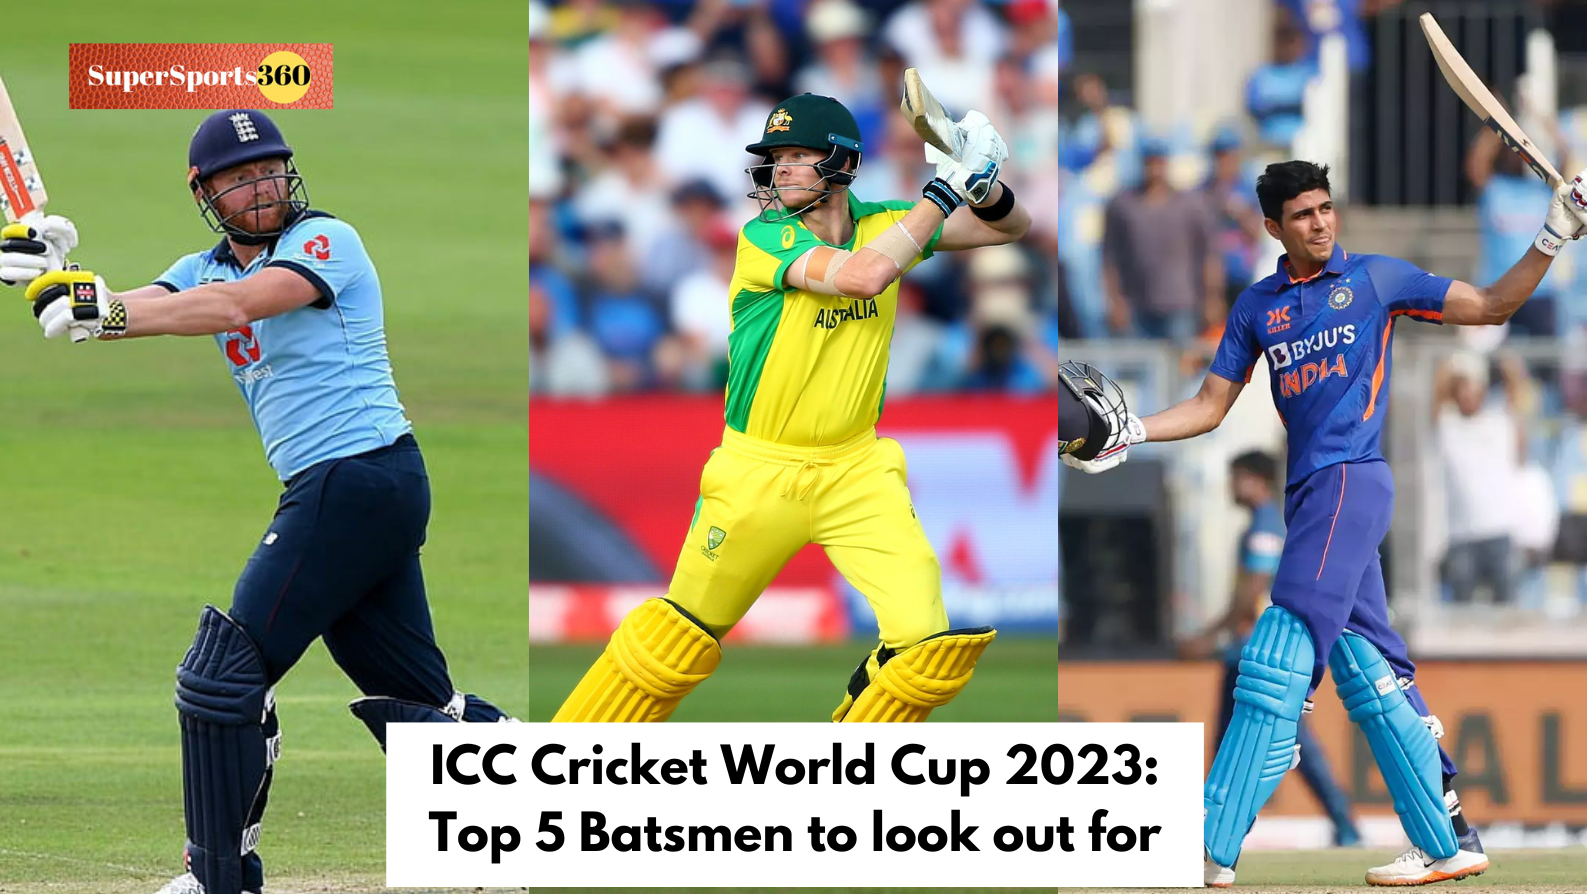 ICC Cricket World Cup 2023: Top 5 Batsmen to look out for